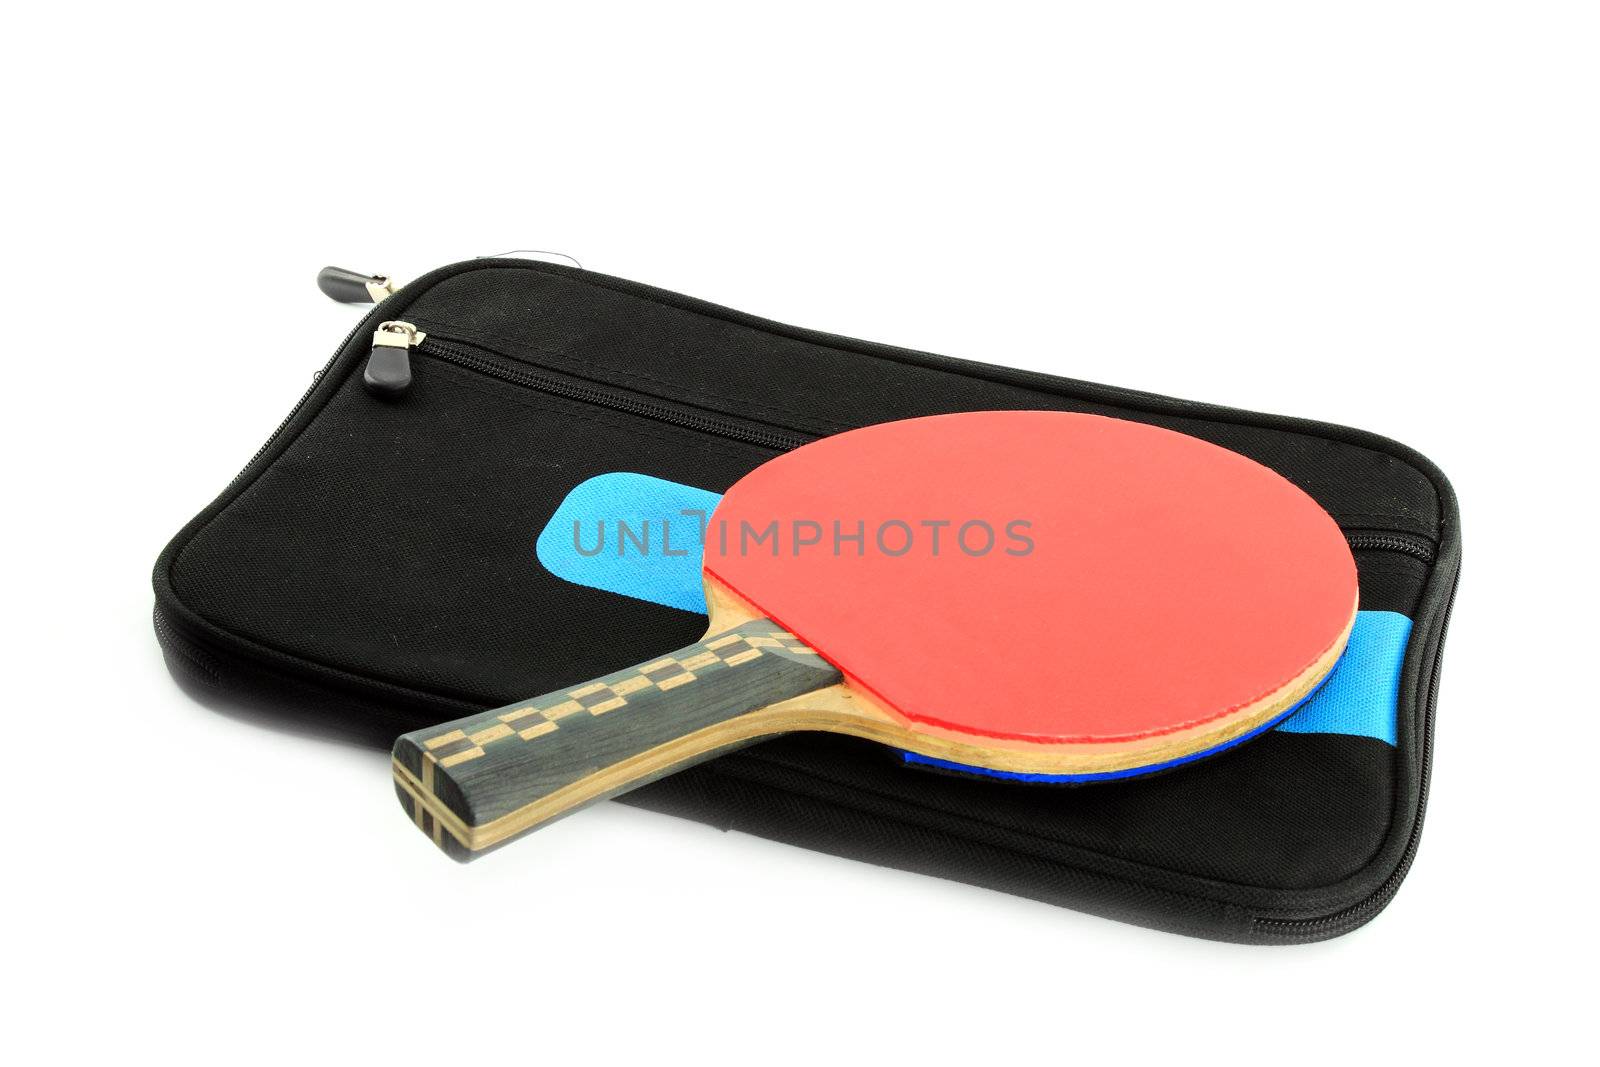 Table tennis racket and case on white blackground by geargodz